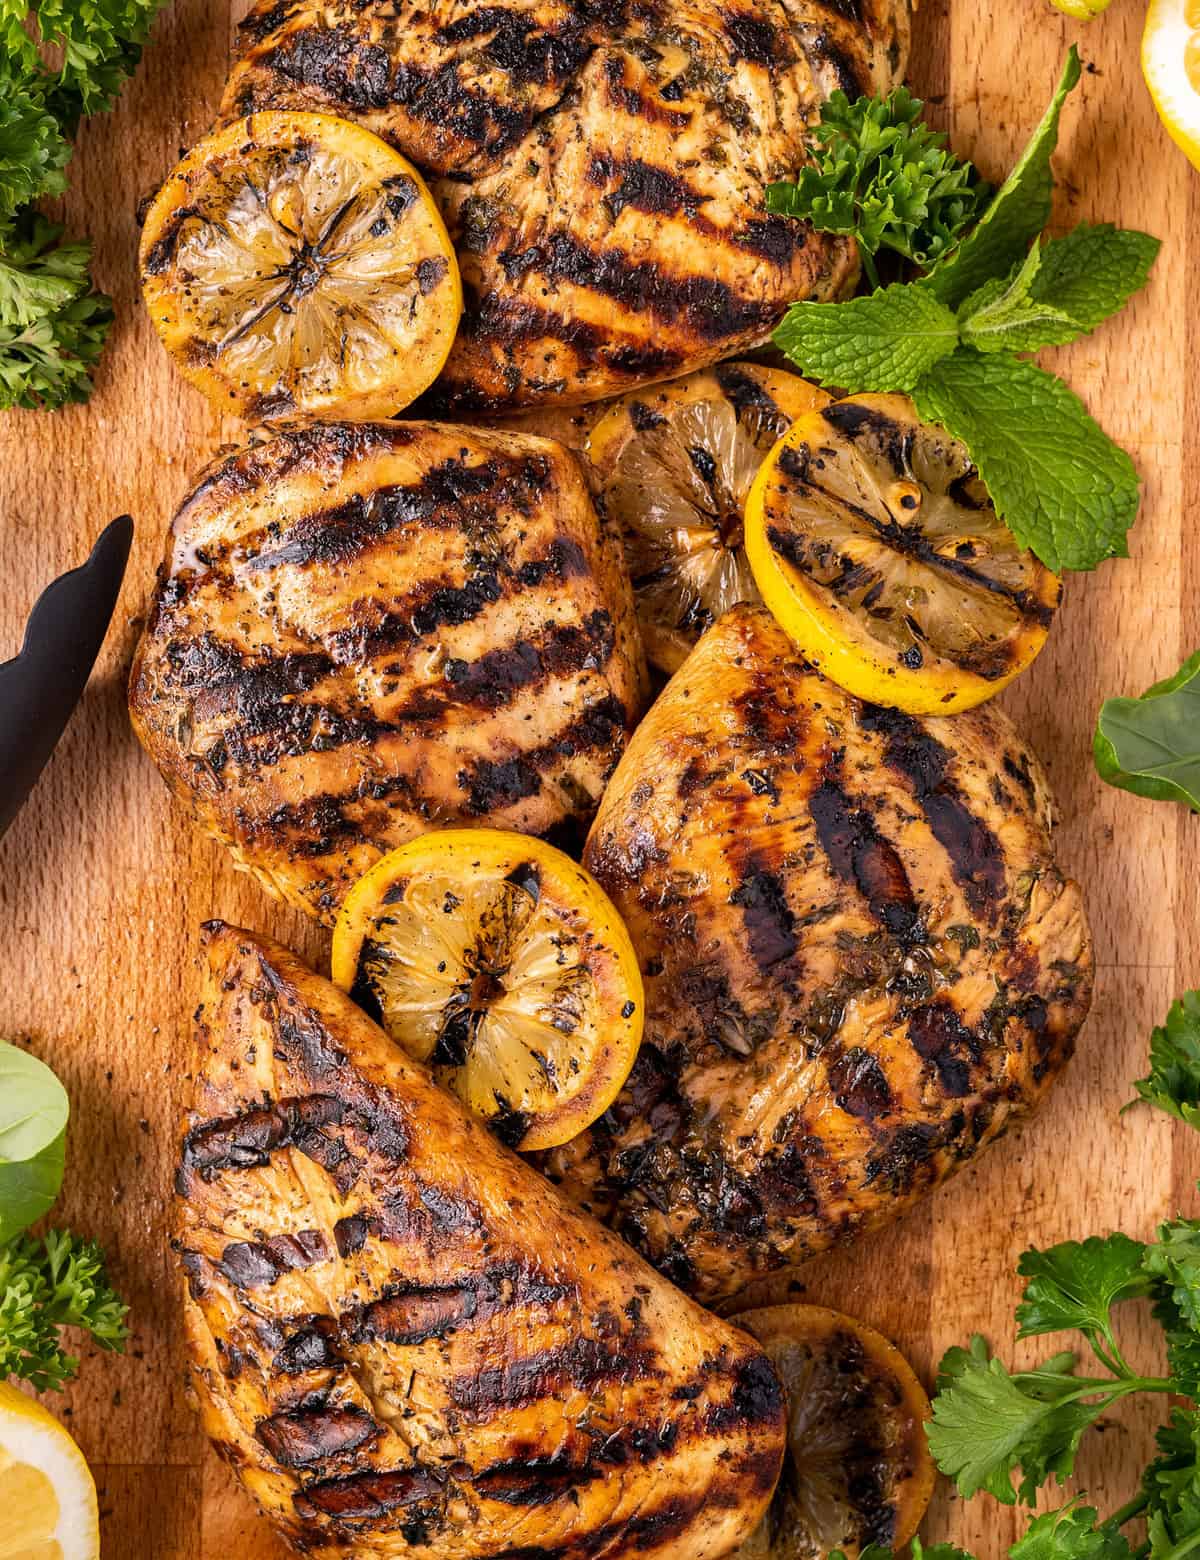 This Lemon Herb Grilled Chicken is juicy and beautifully charred. The easy marinade is perfect for not only chicken, but pork and seafood too. It's a great versatile chicken recipe! #grilled #chicken #lemon